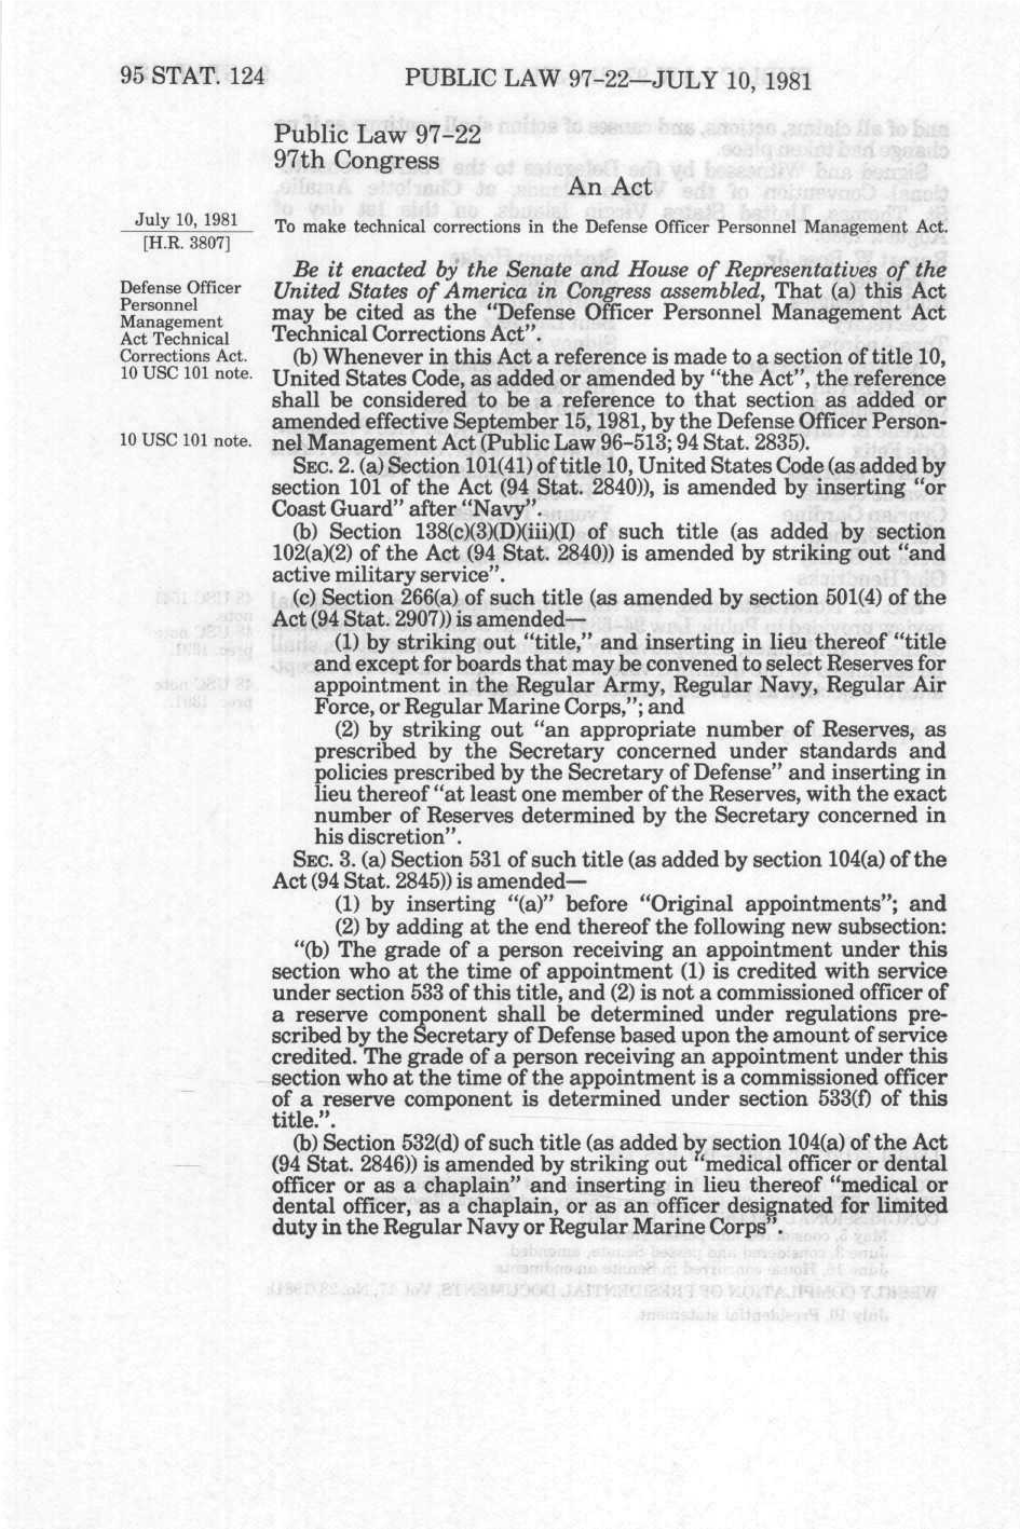 An Act July 10, 1981 Rp^ Make Technical Corrections in the Defense Officer Personnel Management Act